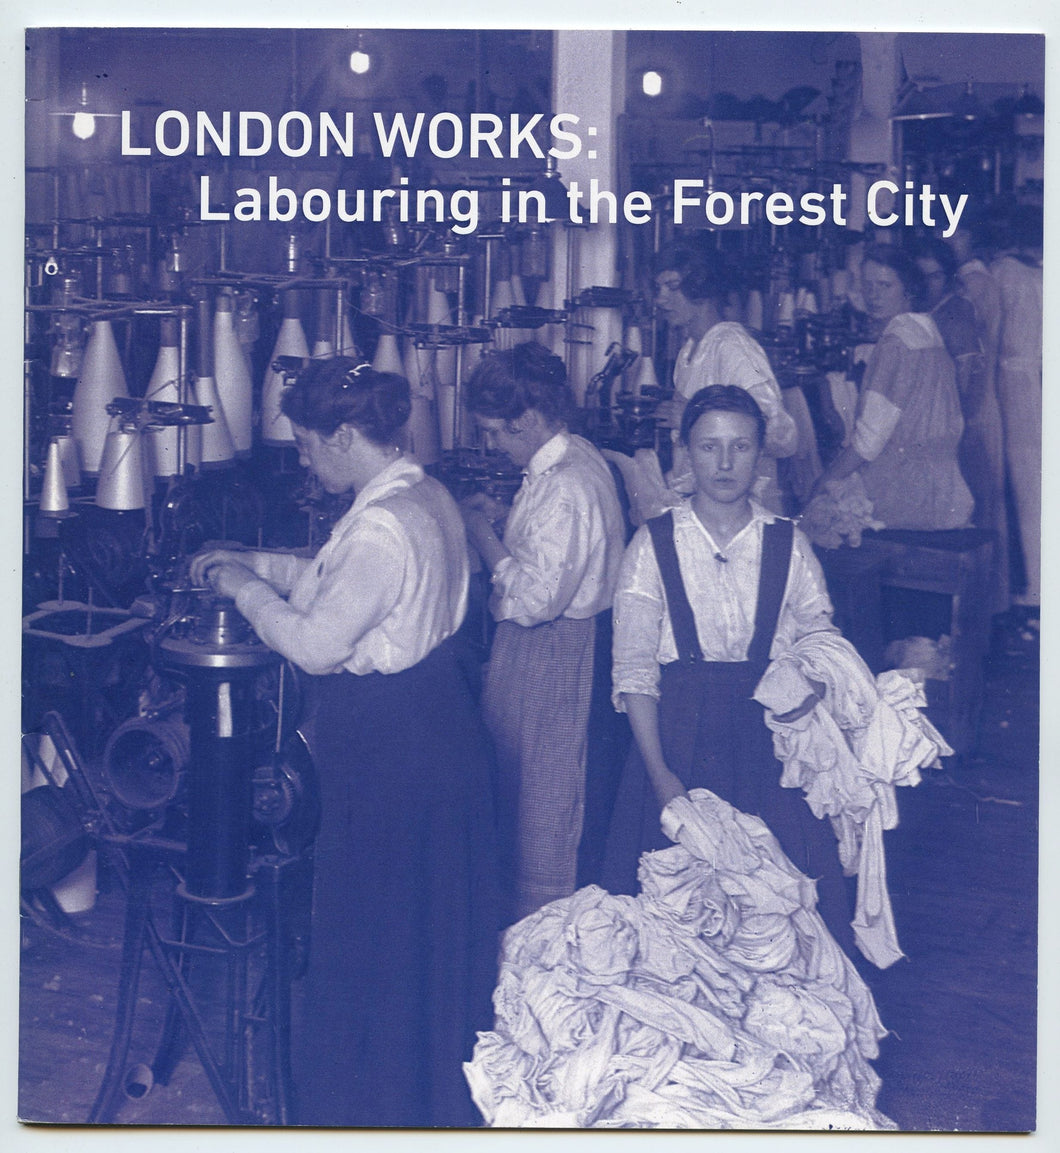 London Works: Labouring in the Forest City